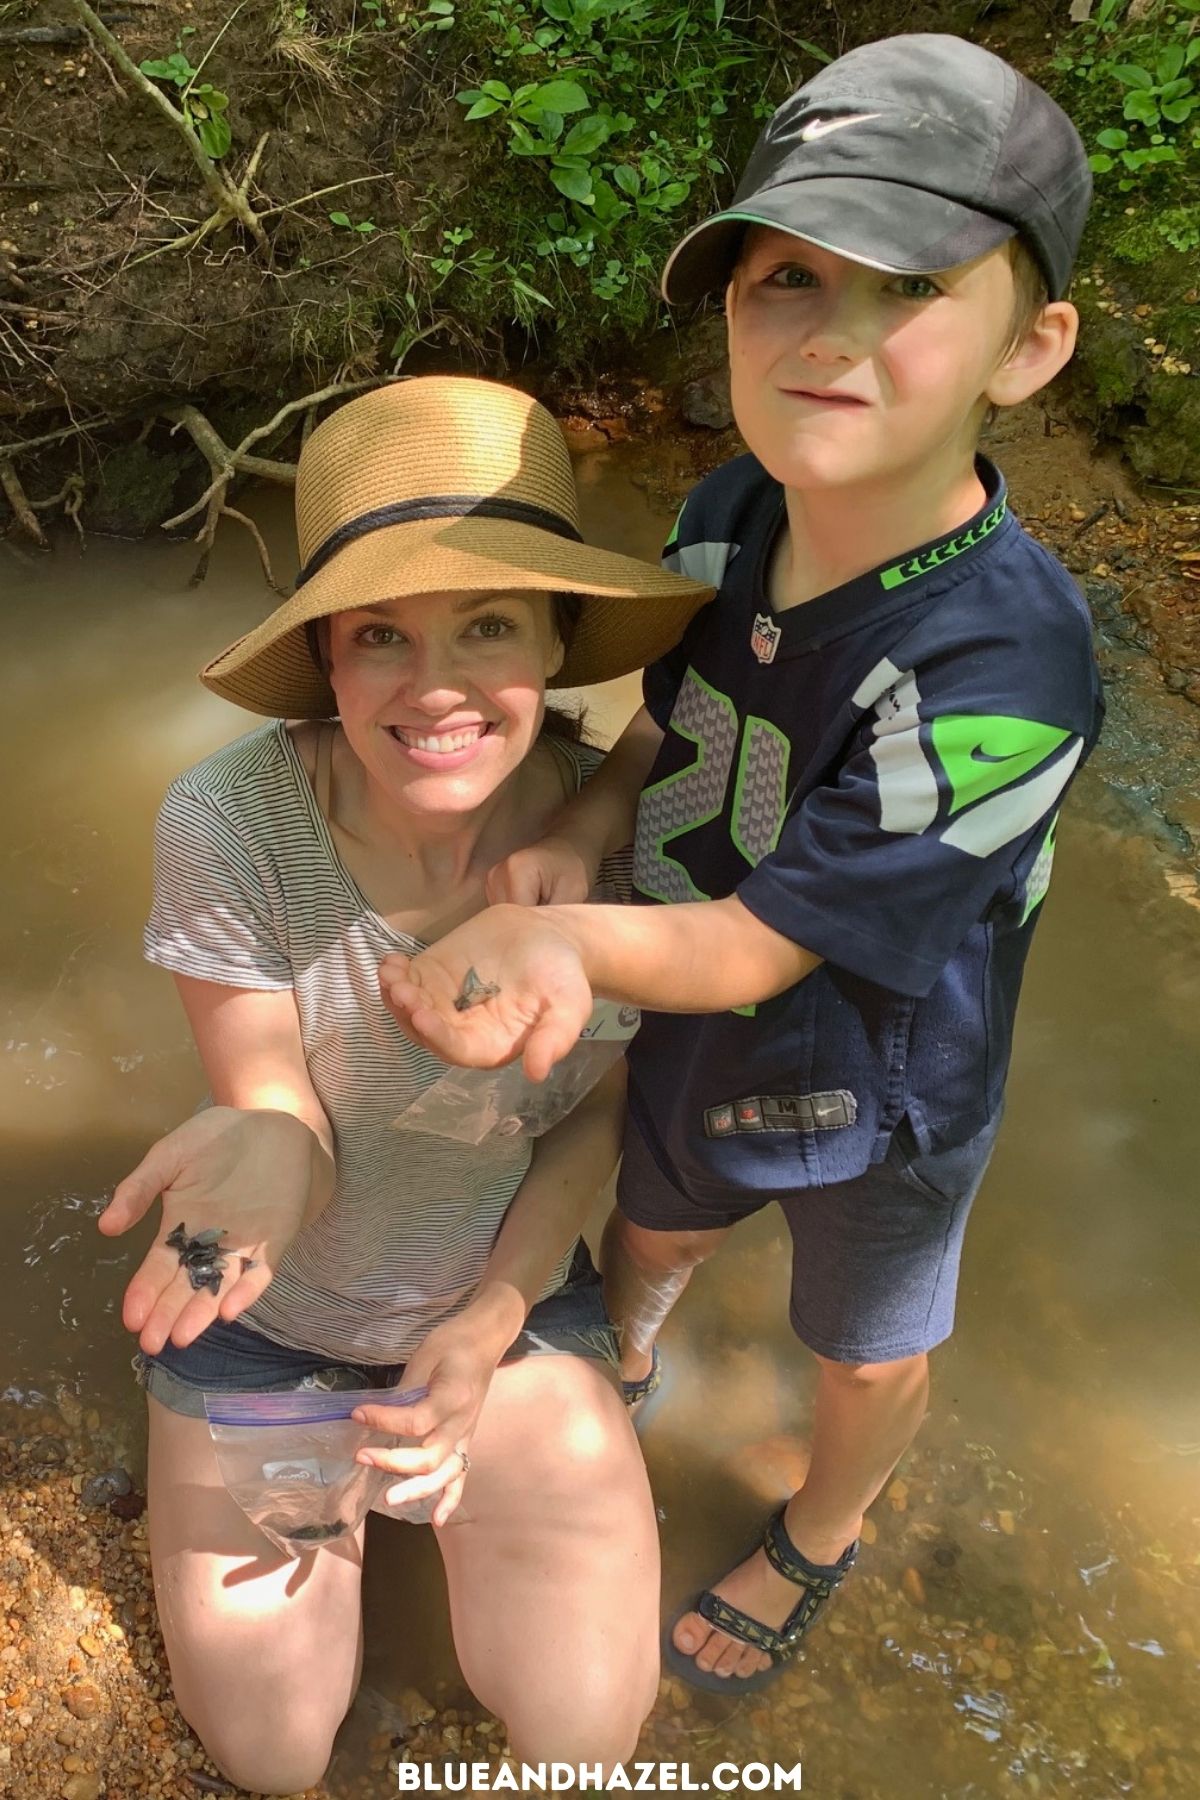 A mother and son holding up their best and biggest shark teeth finds in a creek at Shark Tooth Creek, Alabama